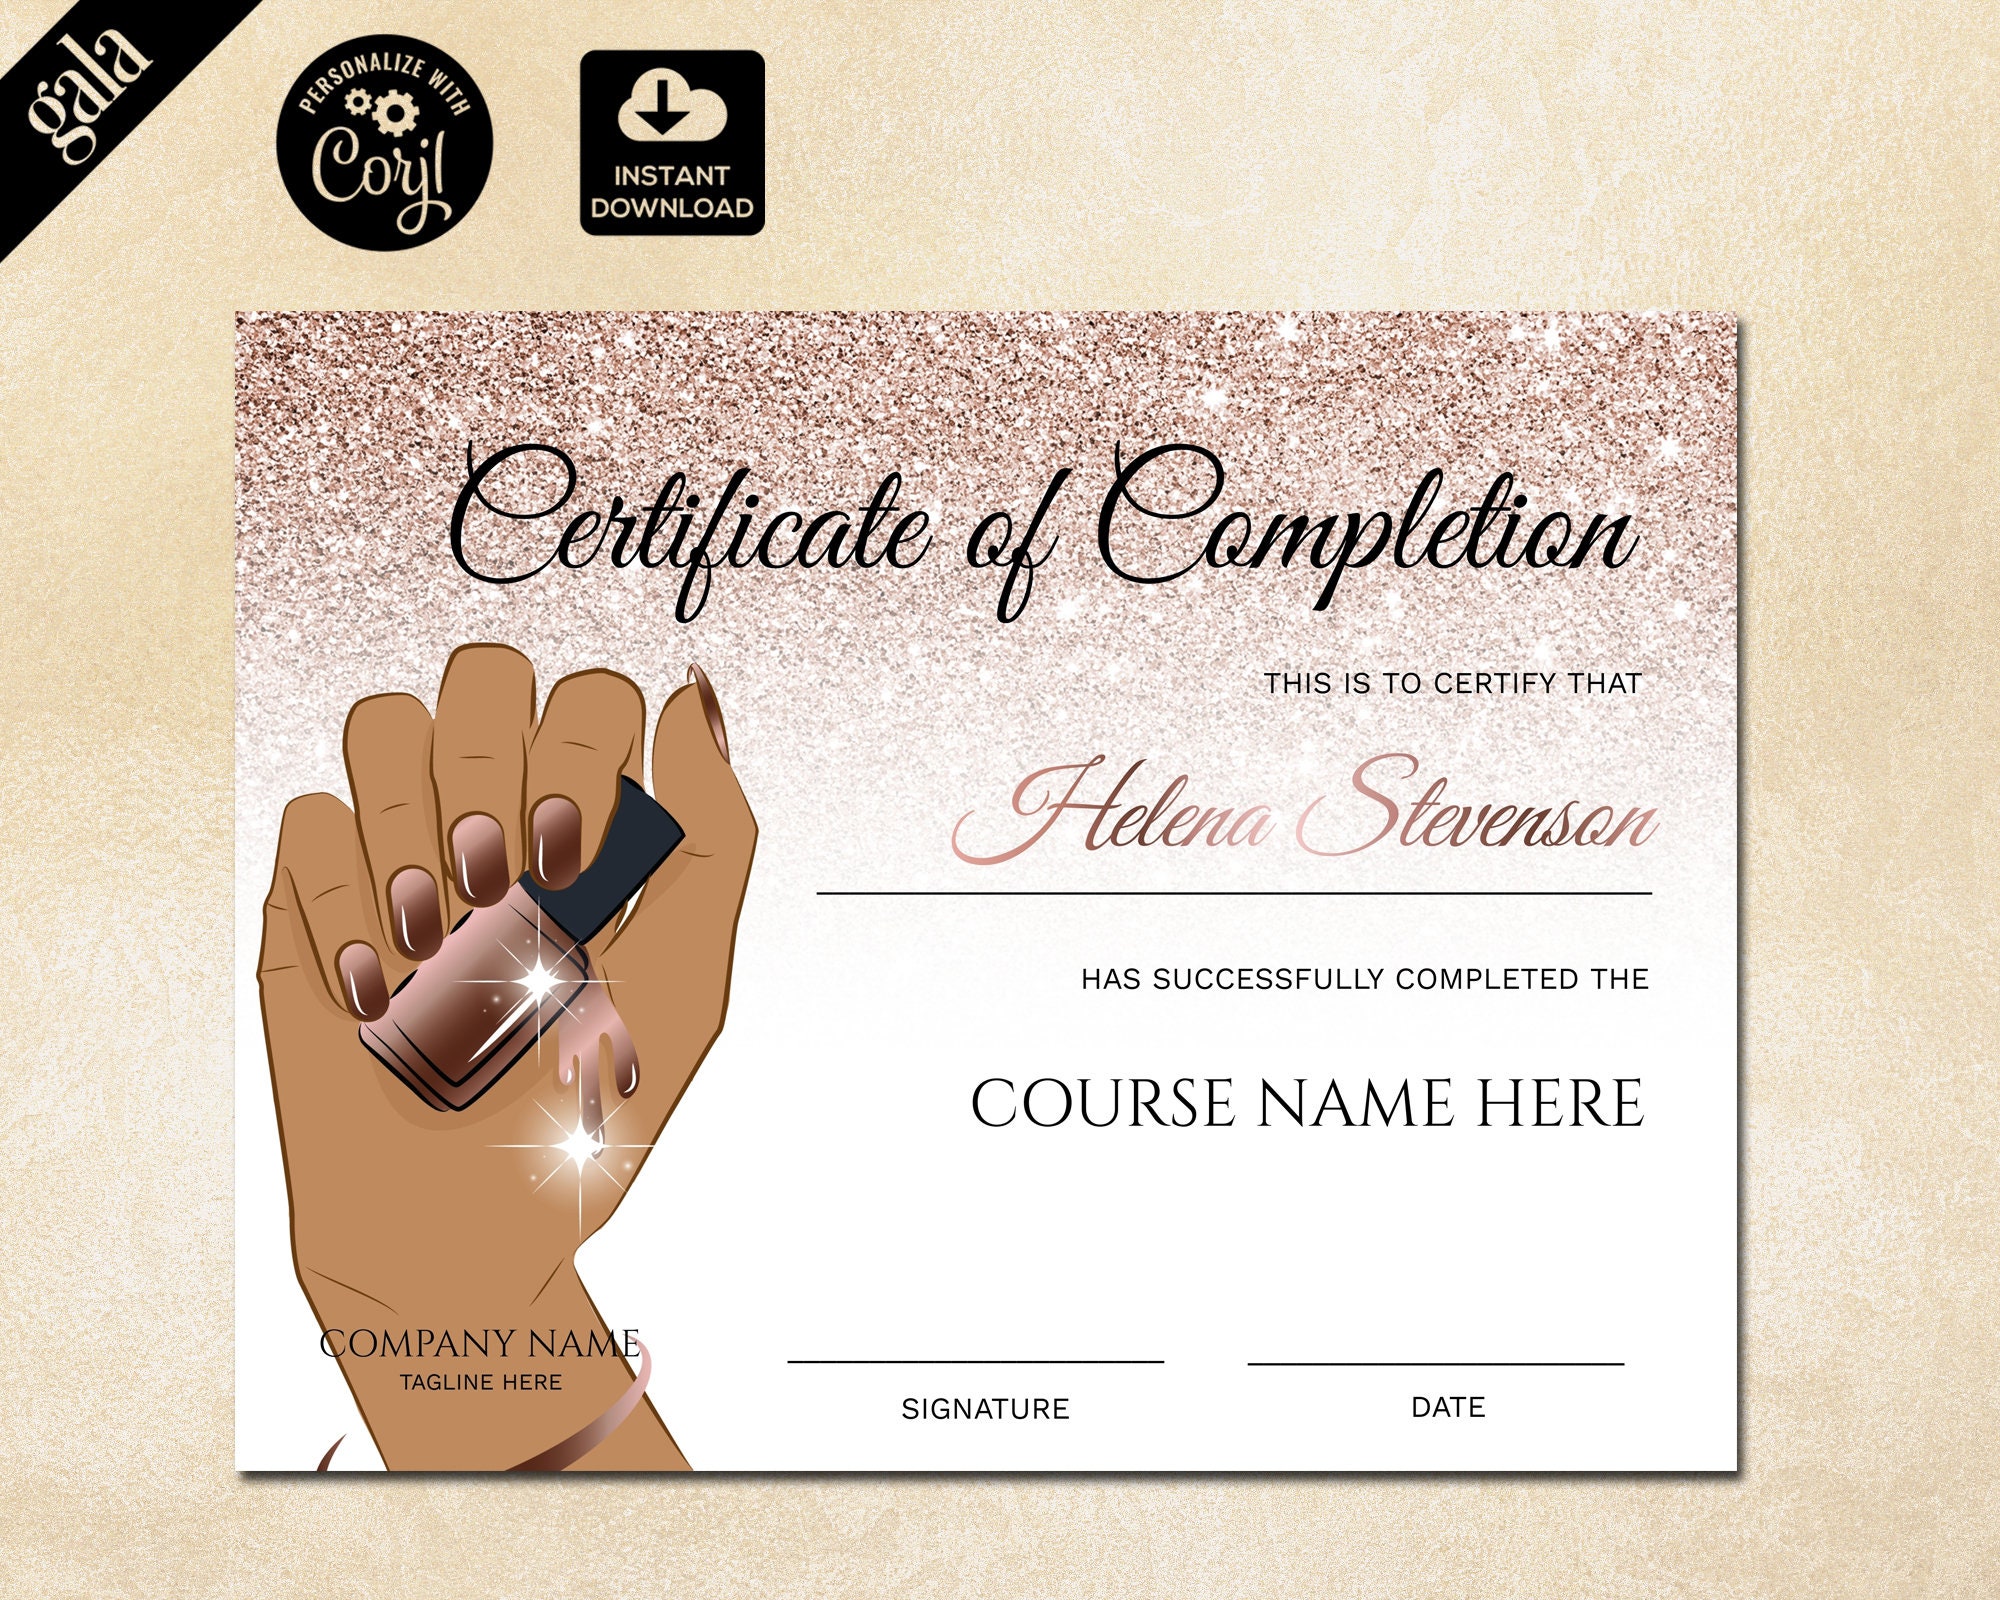 10. Nail Art Certificate of Completion - wide 9